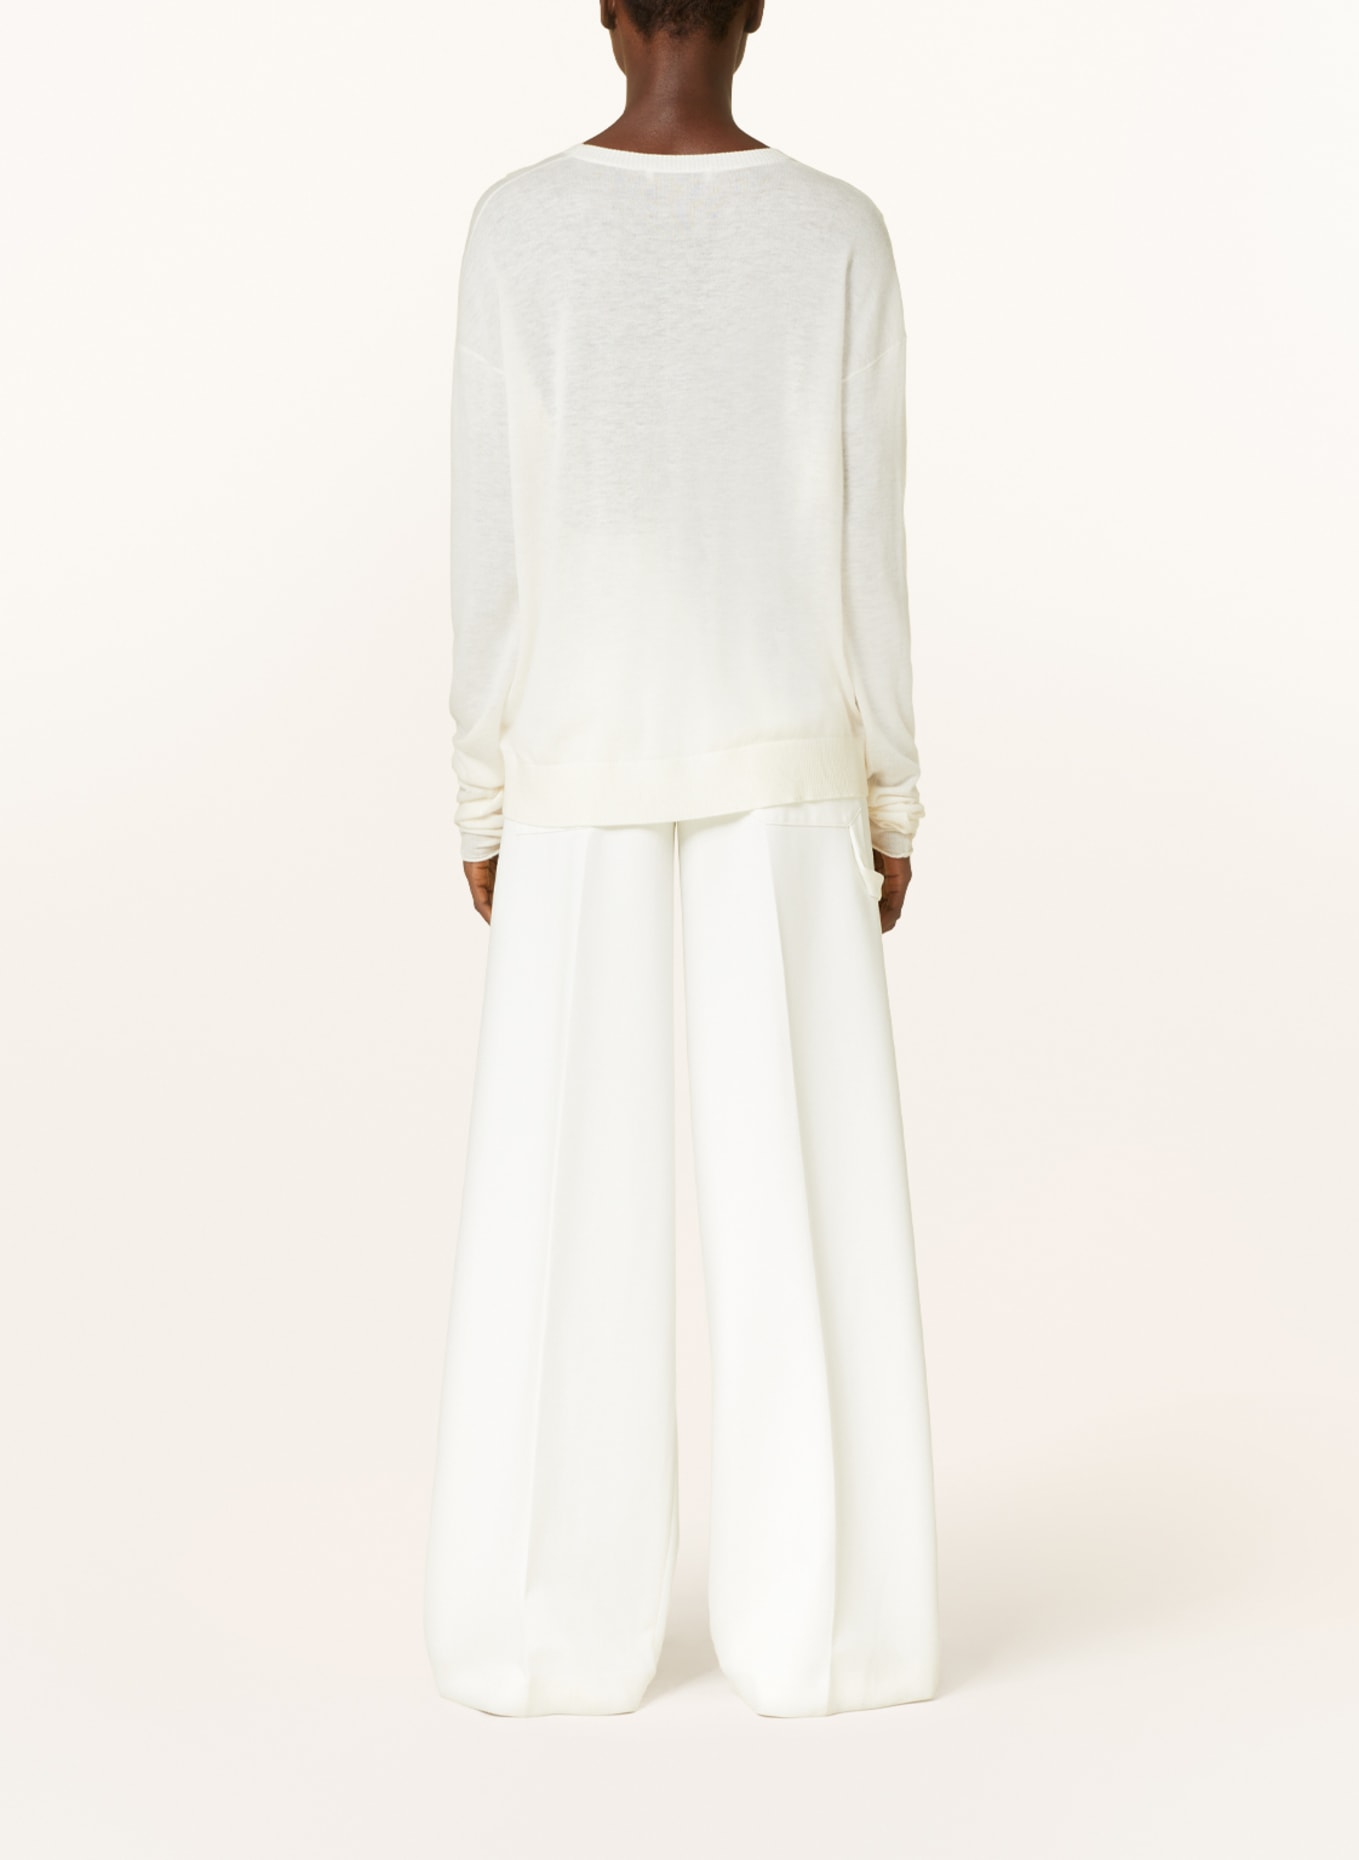 DOROTHEE SCHUMACHER Sweater with cashmere, Color: CREAM (Image 3)